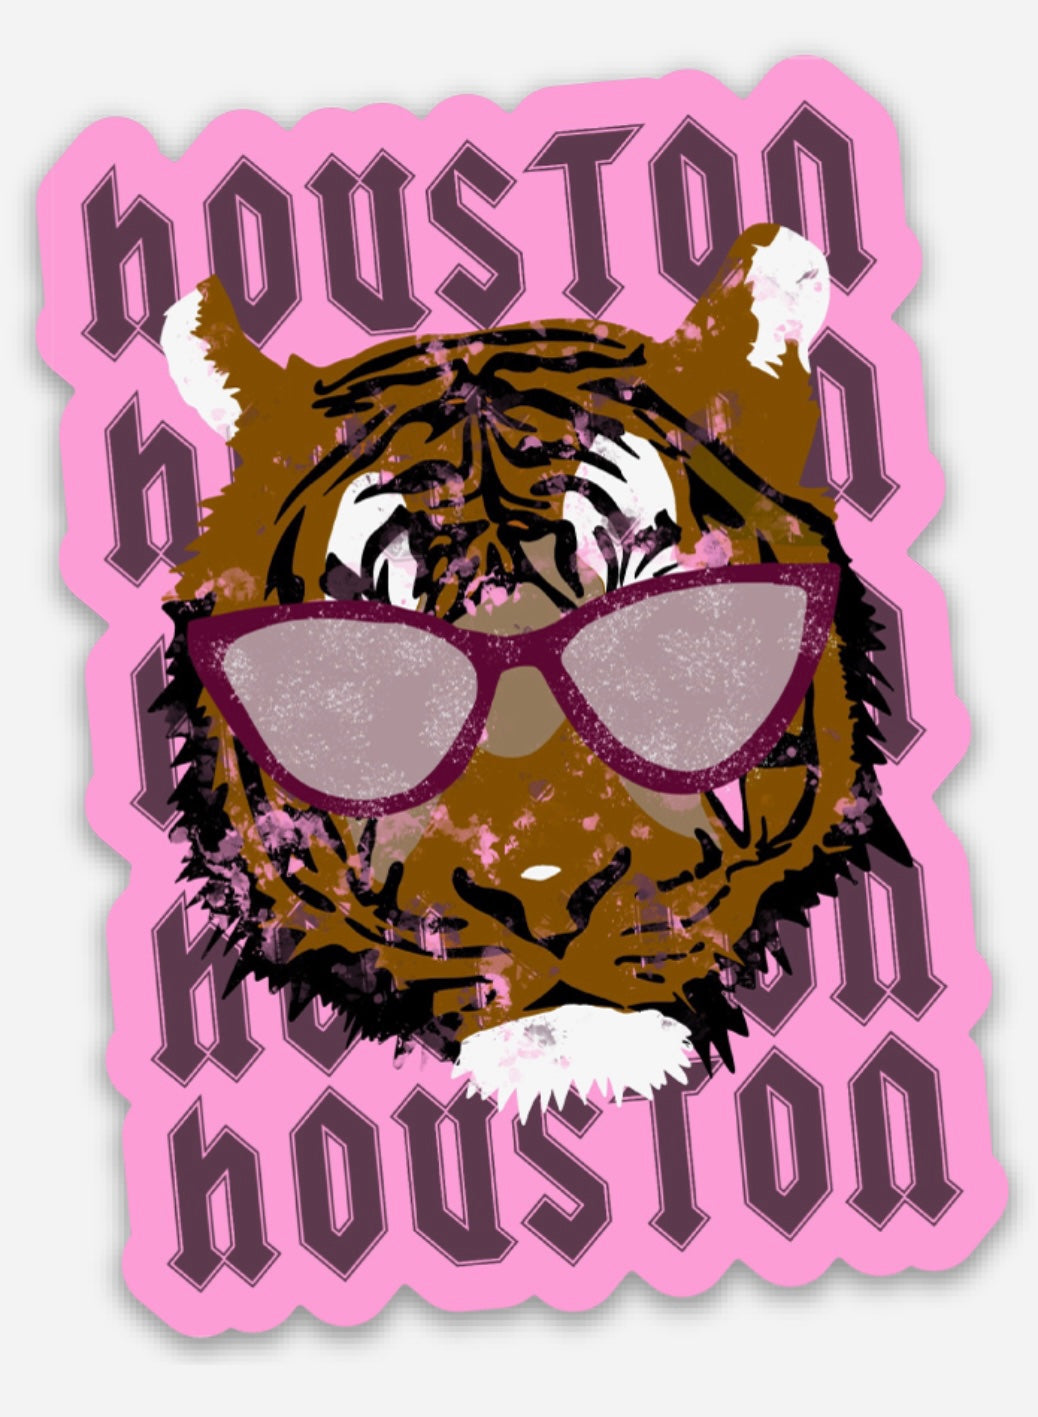 Waterproof HTX Co. Collectible Stickers